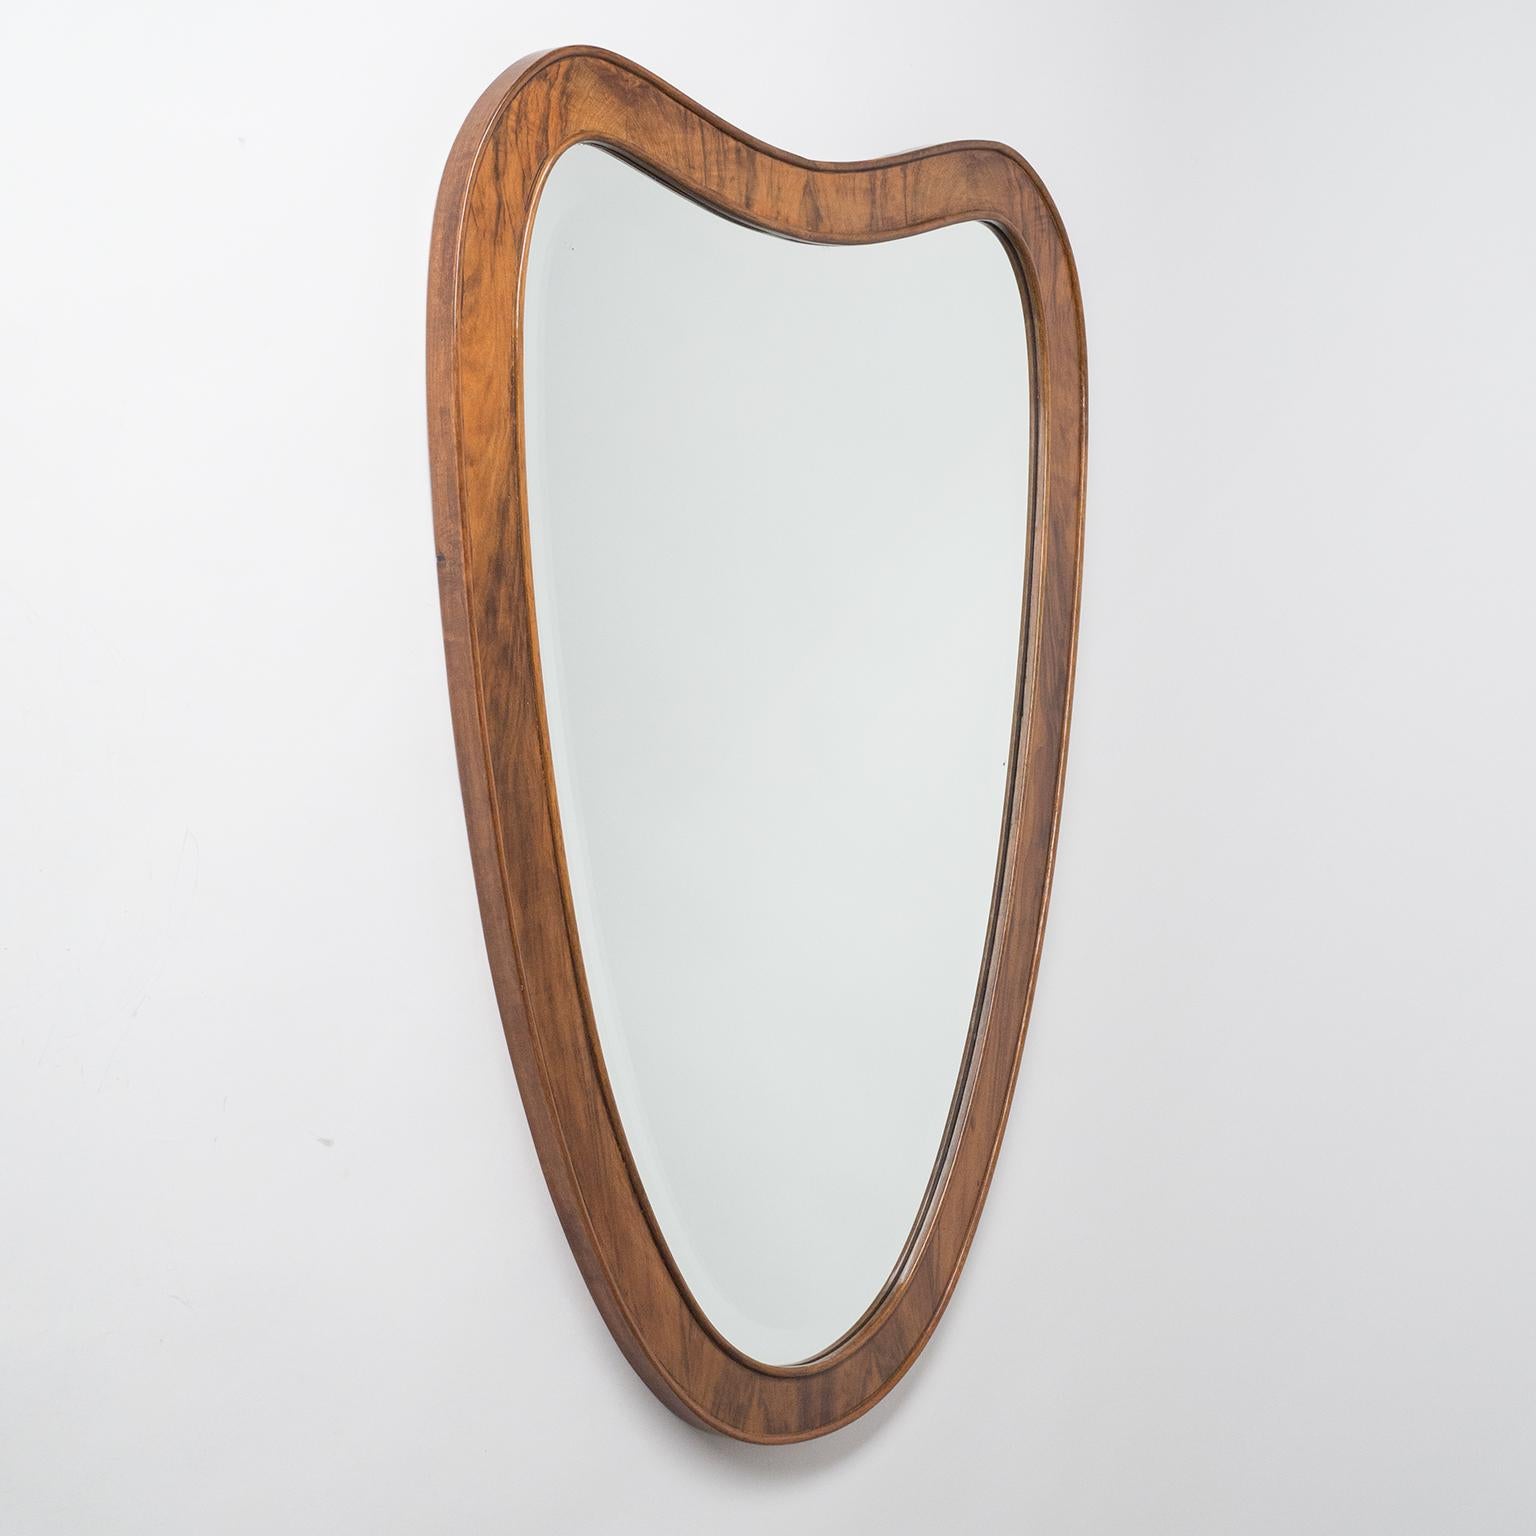 Rare Italian heart-shaped mirror from the 1930-1940s. Broad walnut frame with a lovely rich grain. Original facetted mirror in very good condition.